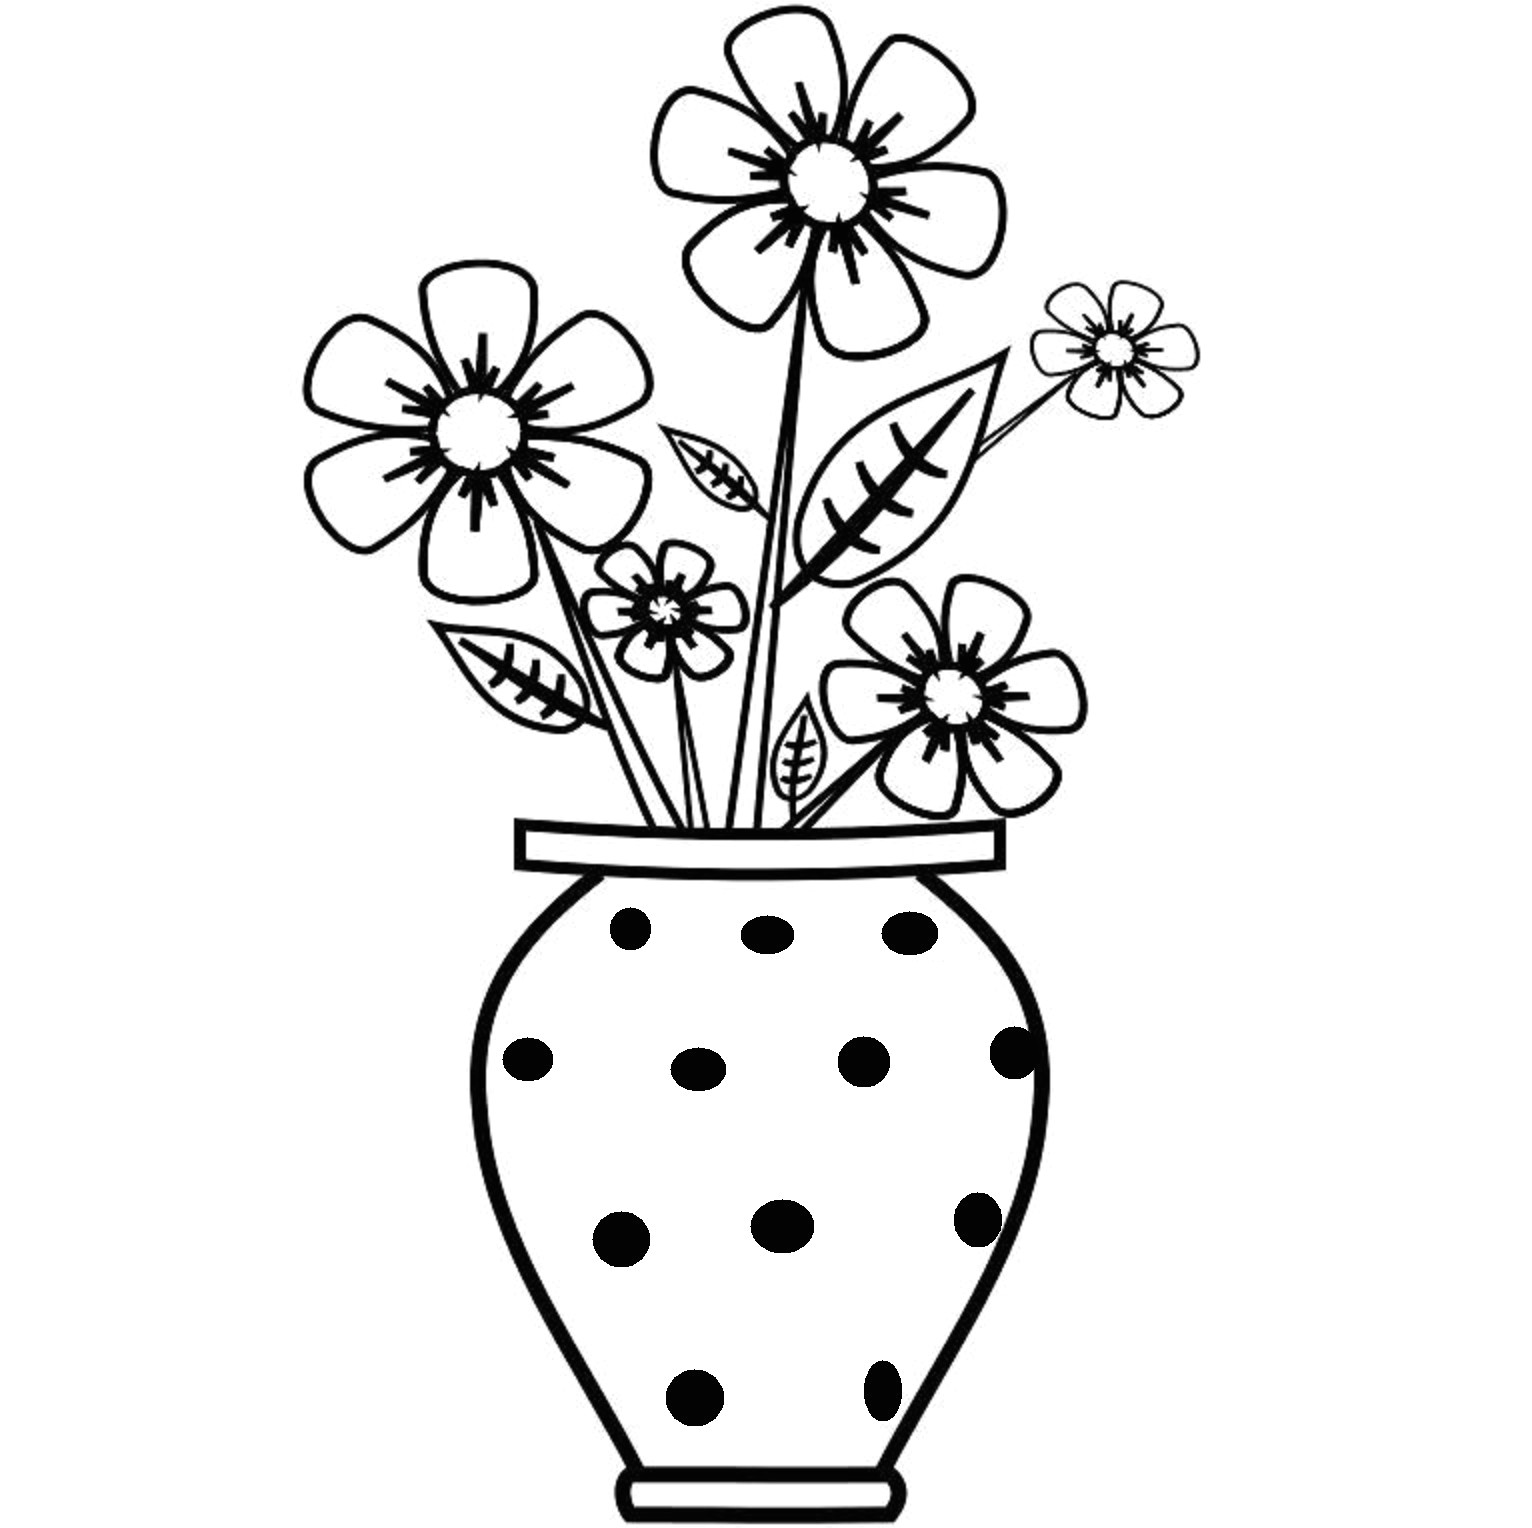 flowers to draw easy step by step flower pot for drawing sketches pinterest of flowers to